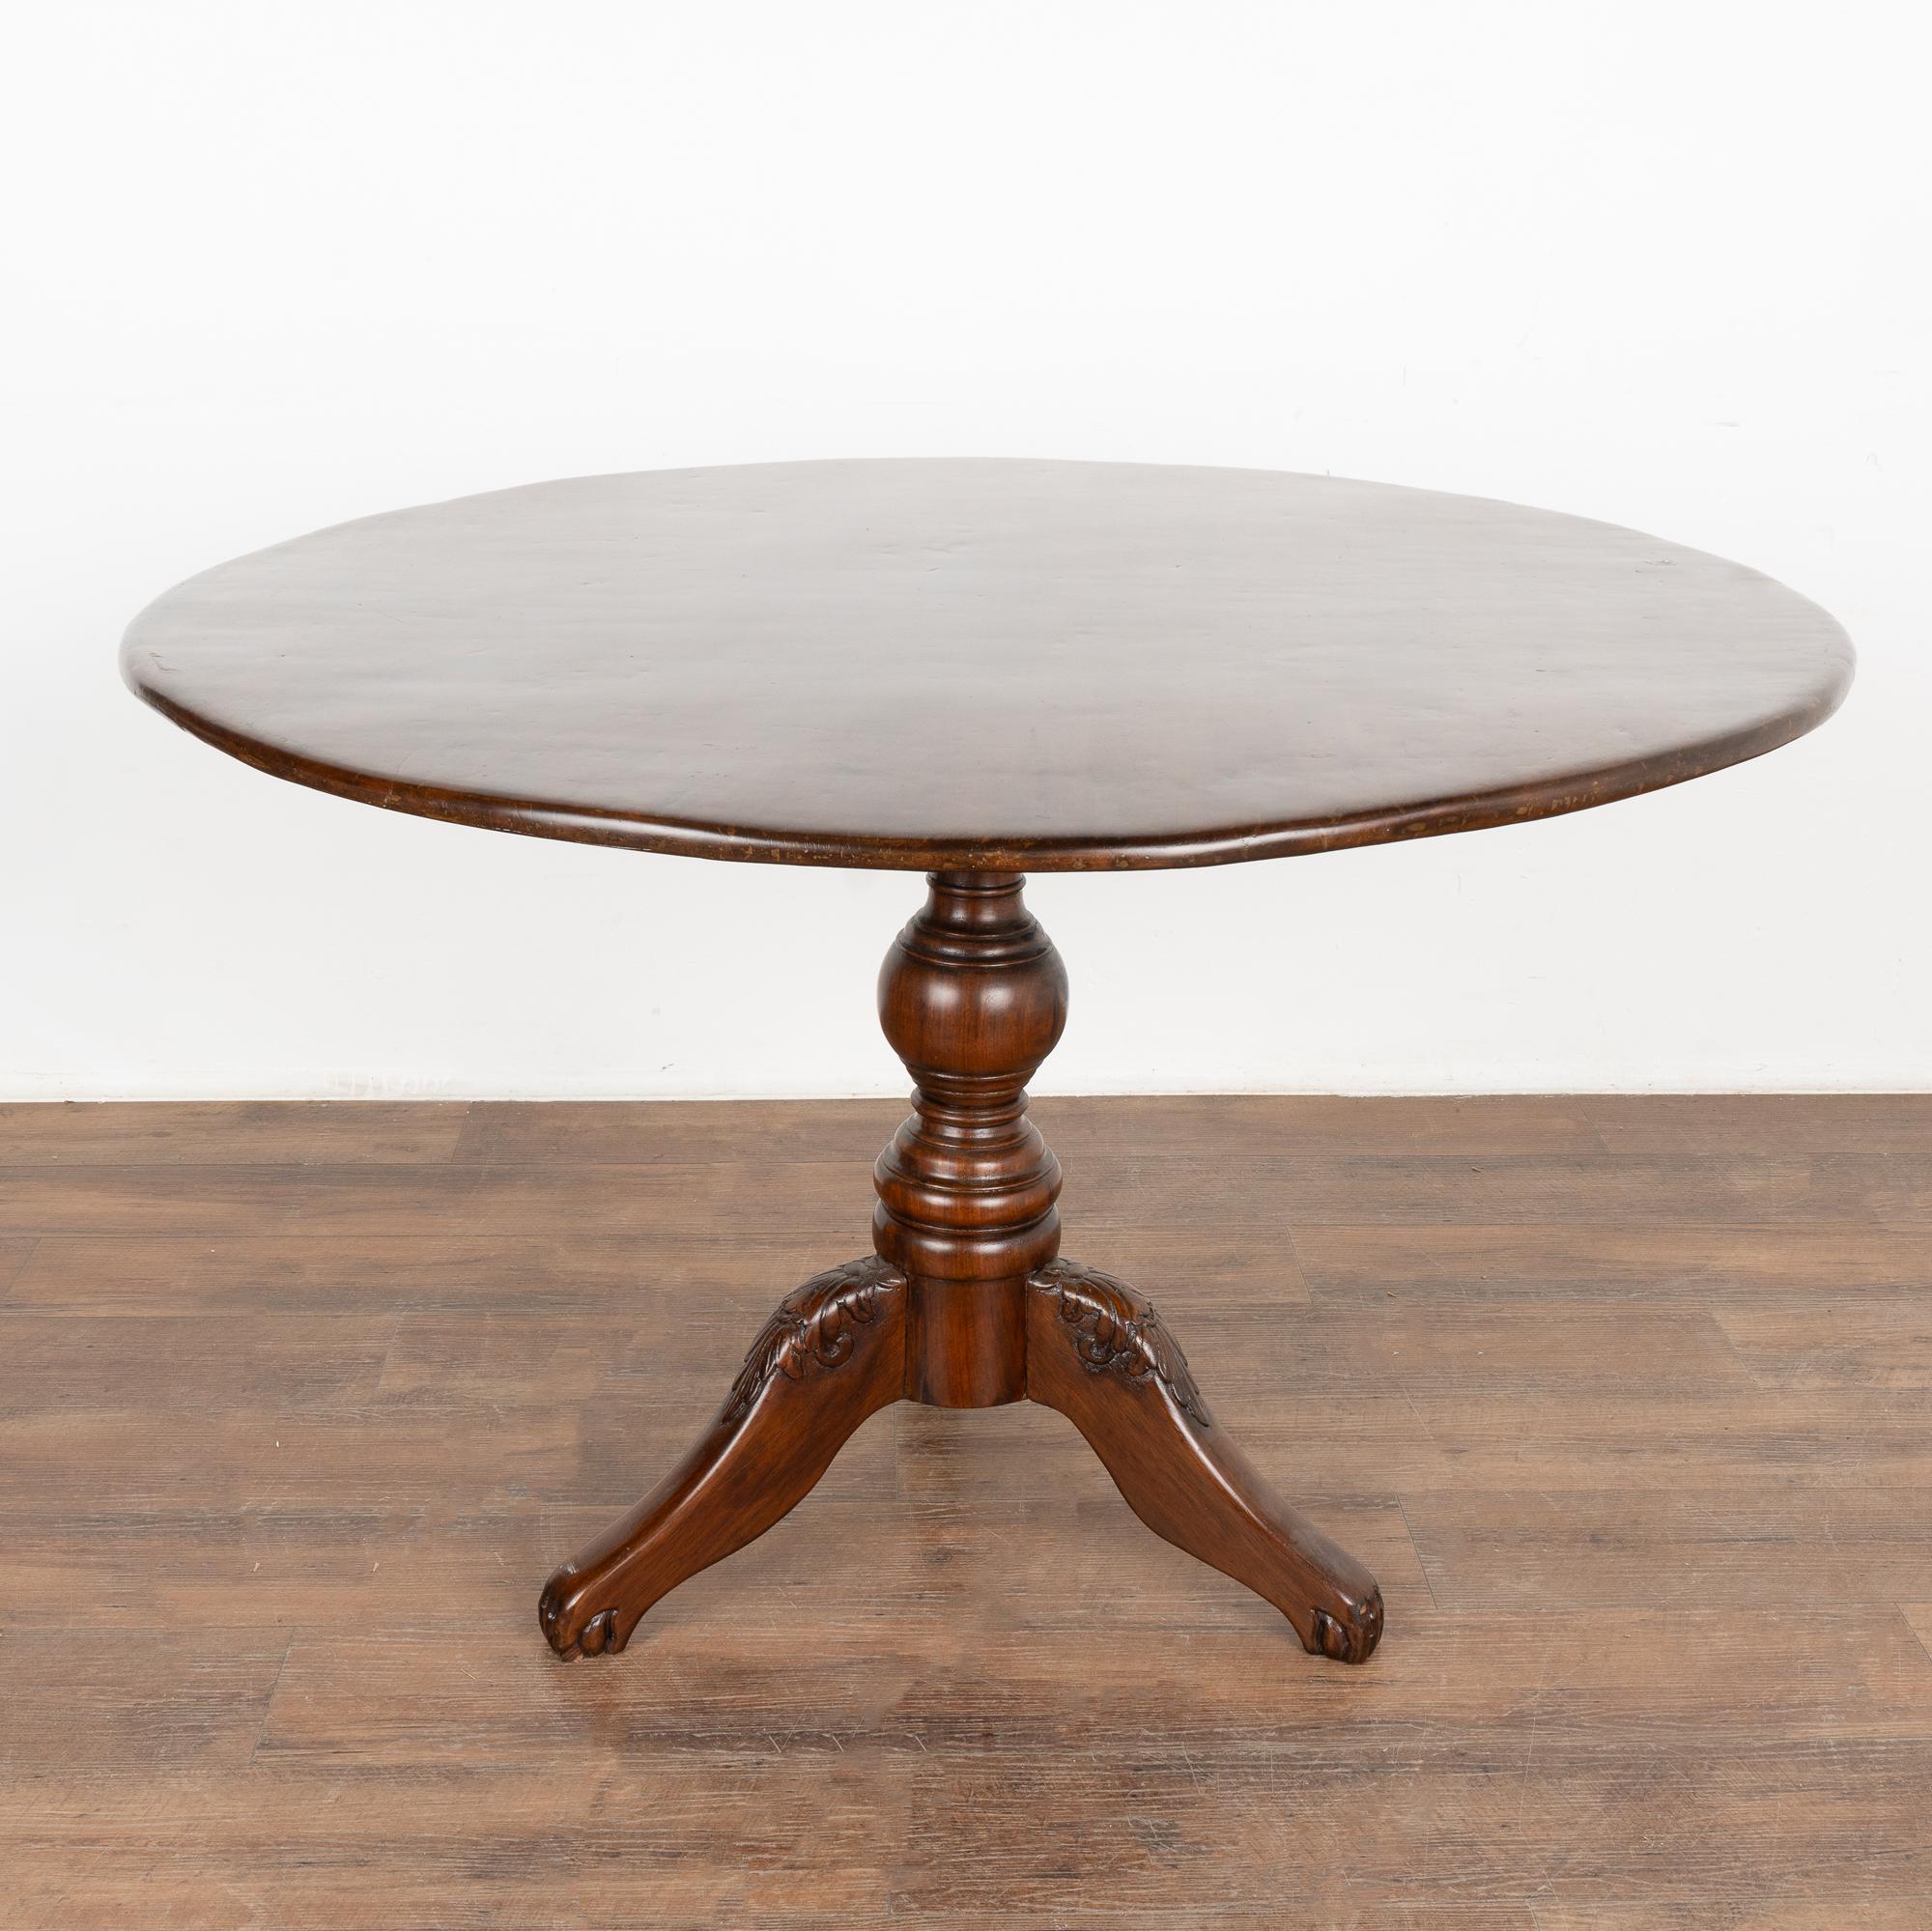 Round Narra Wood Pedestal Table, Philippines circa 1840-60 For Sale 7